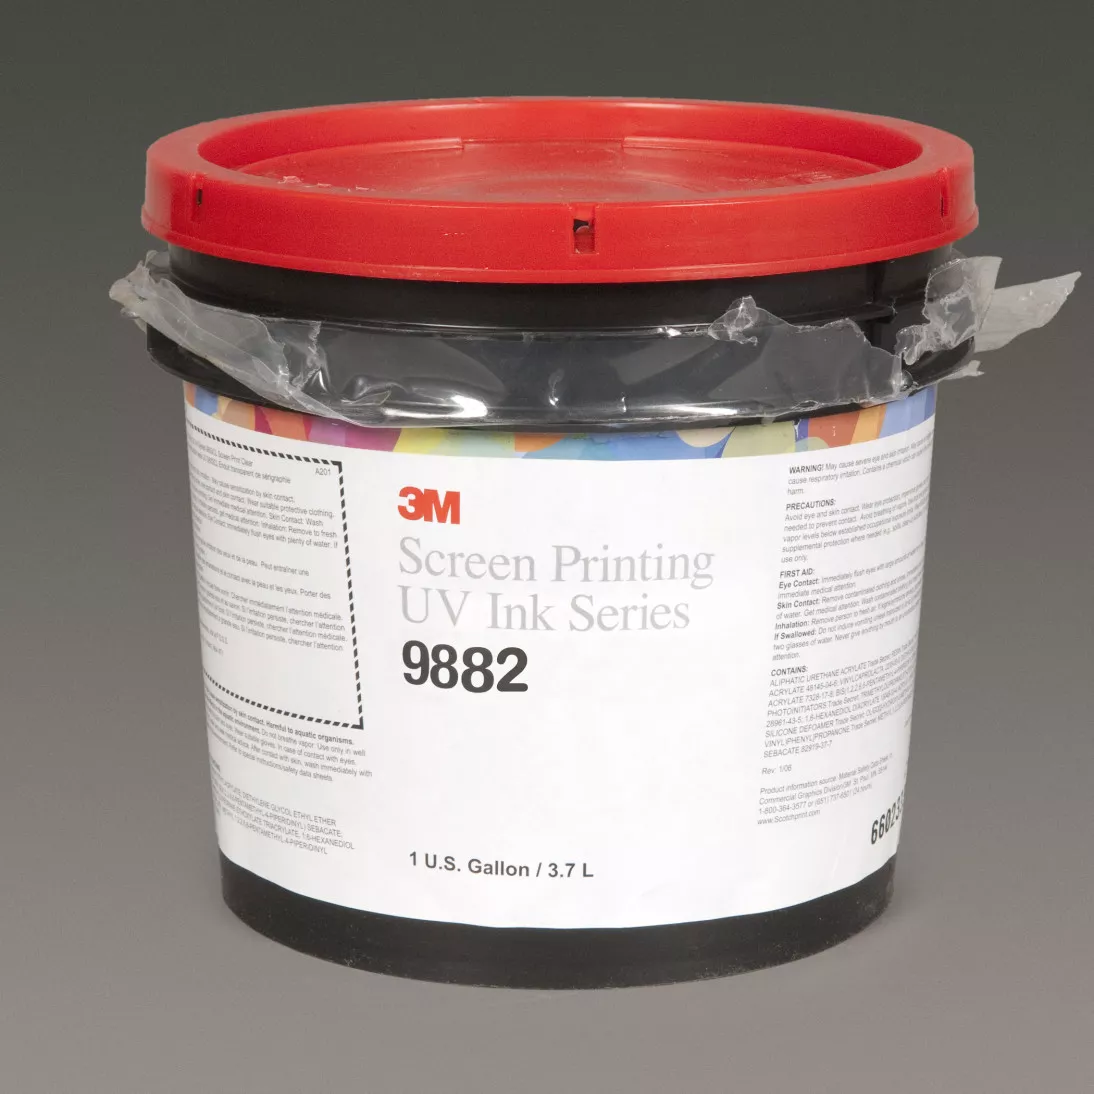 3M™ Screen Printing UV Ink 9882, Transparent Blue (RS), 1 Gallon
Container